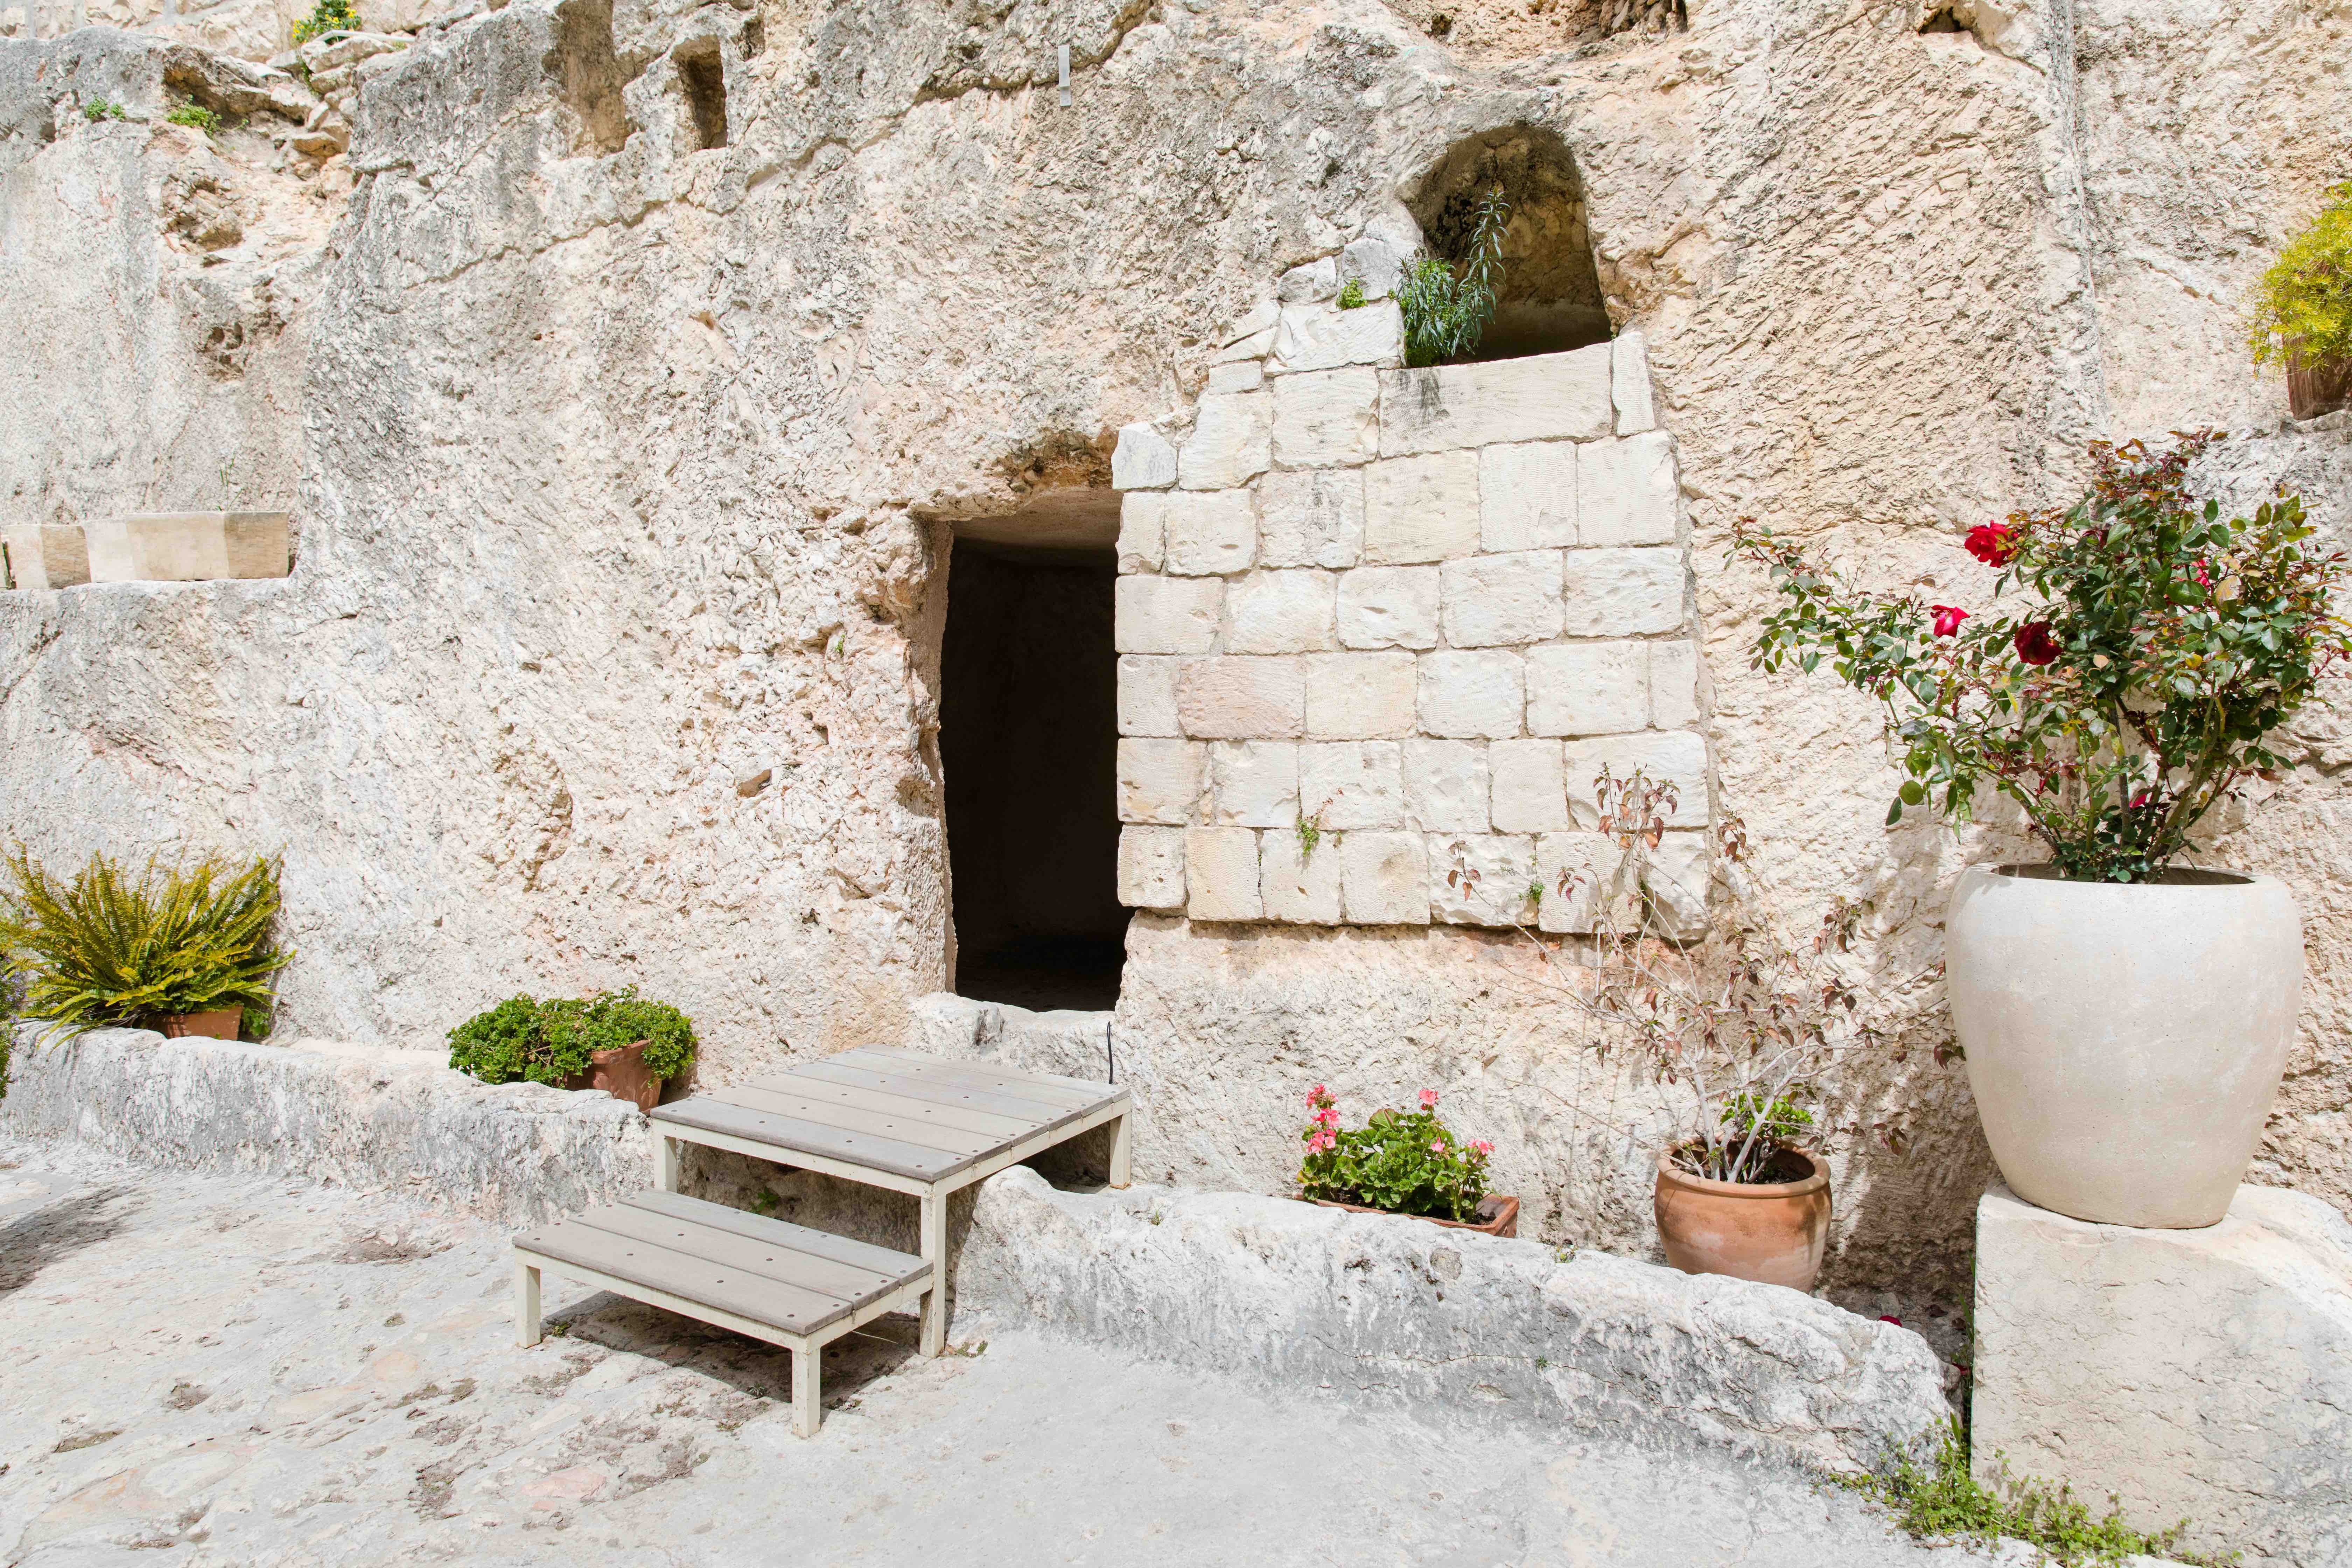 Ancient tomb in Jerusalem where Jesus laid